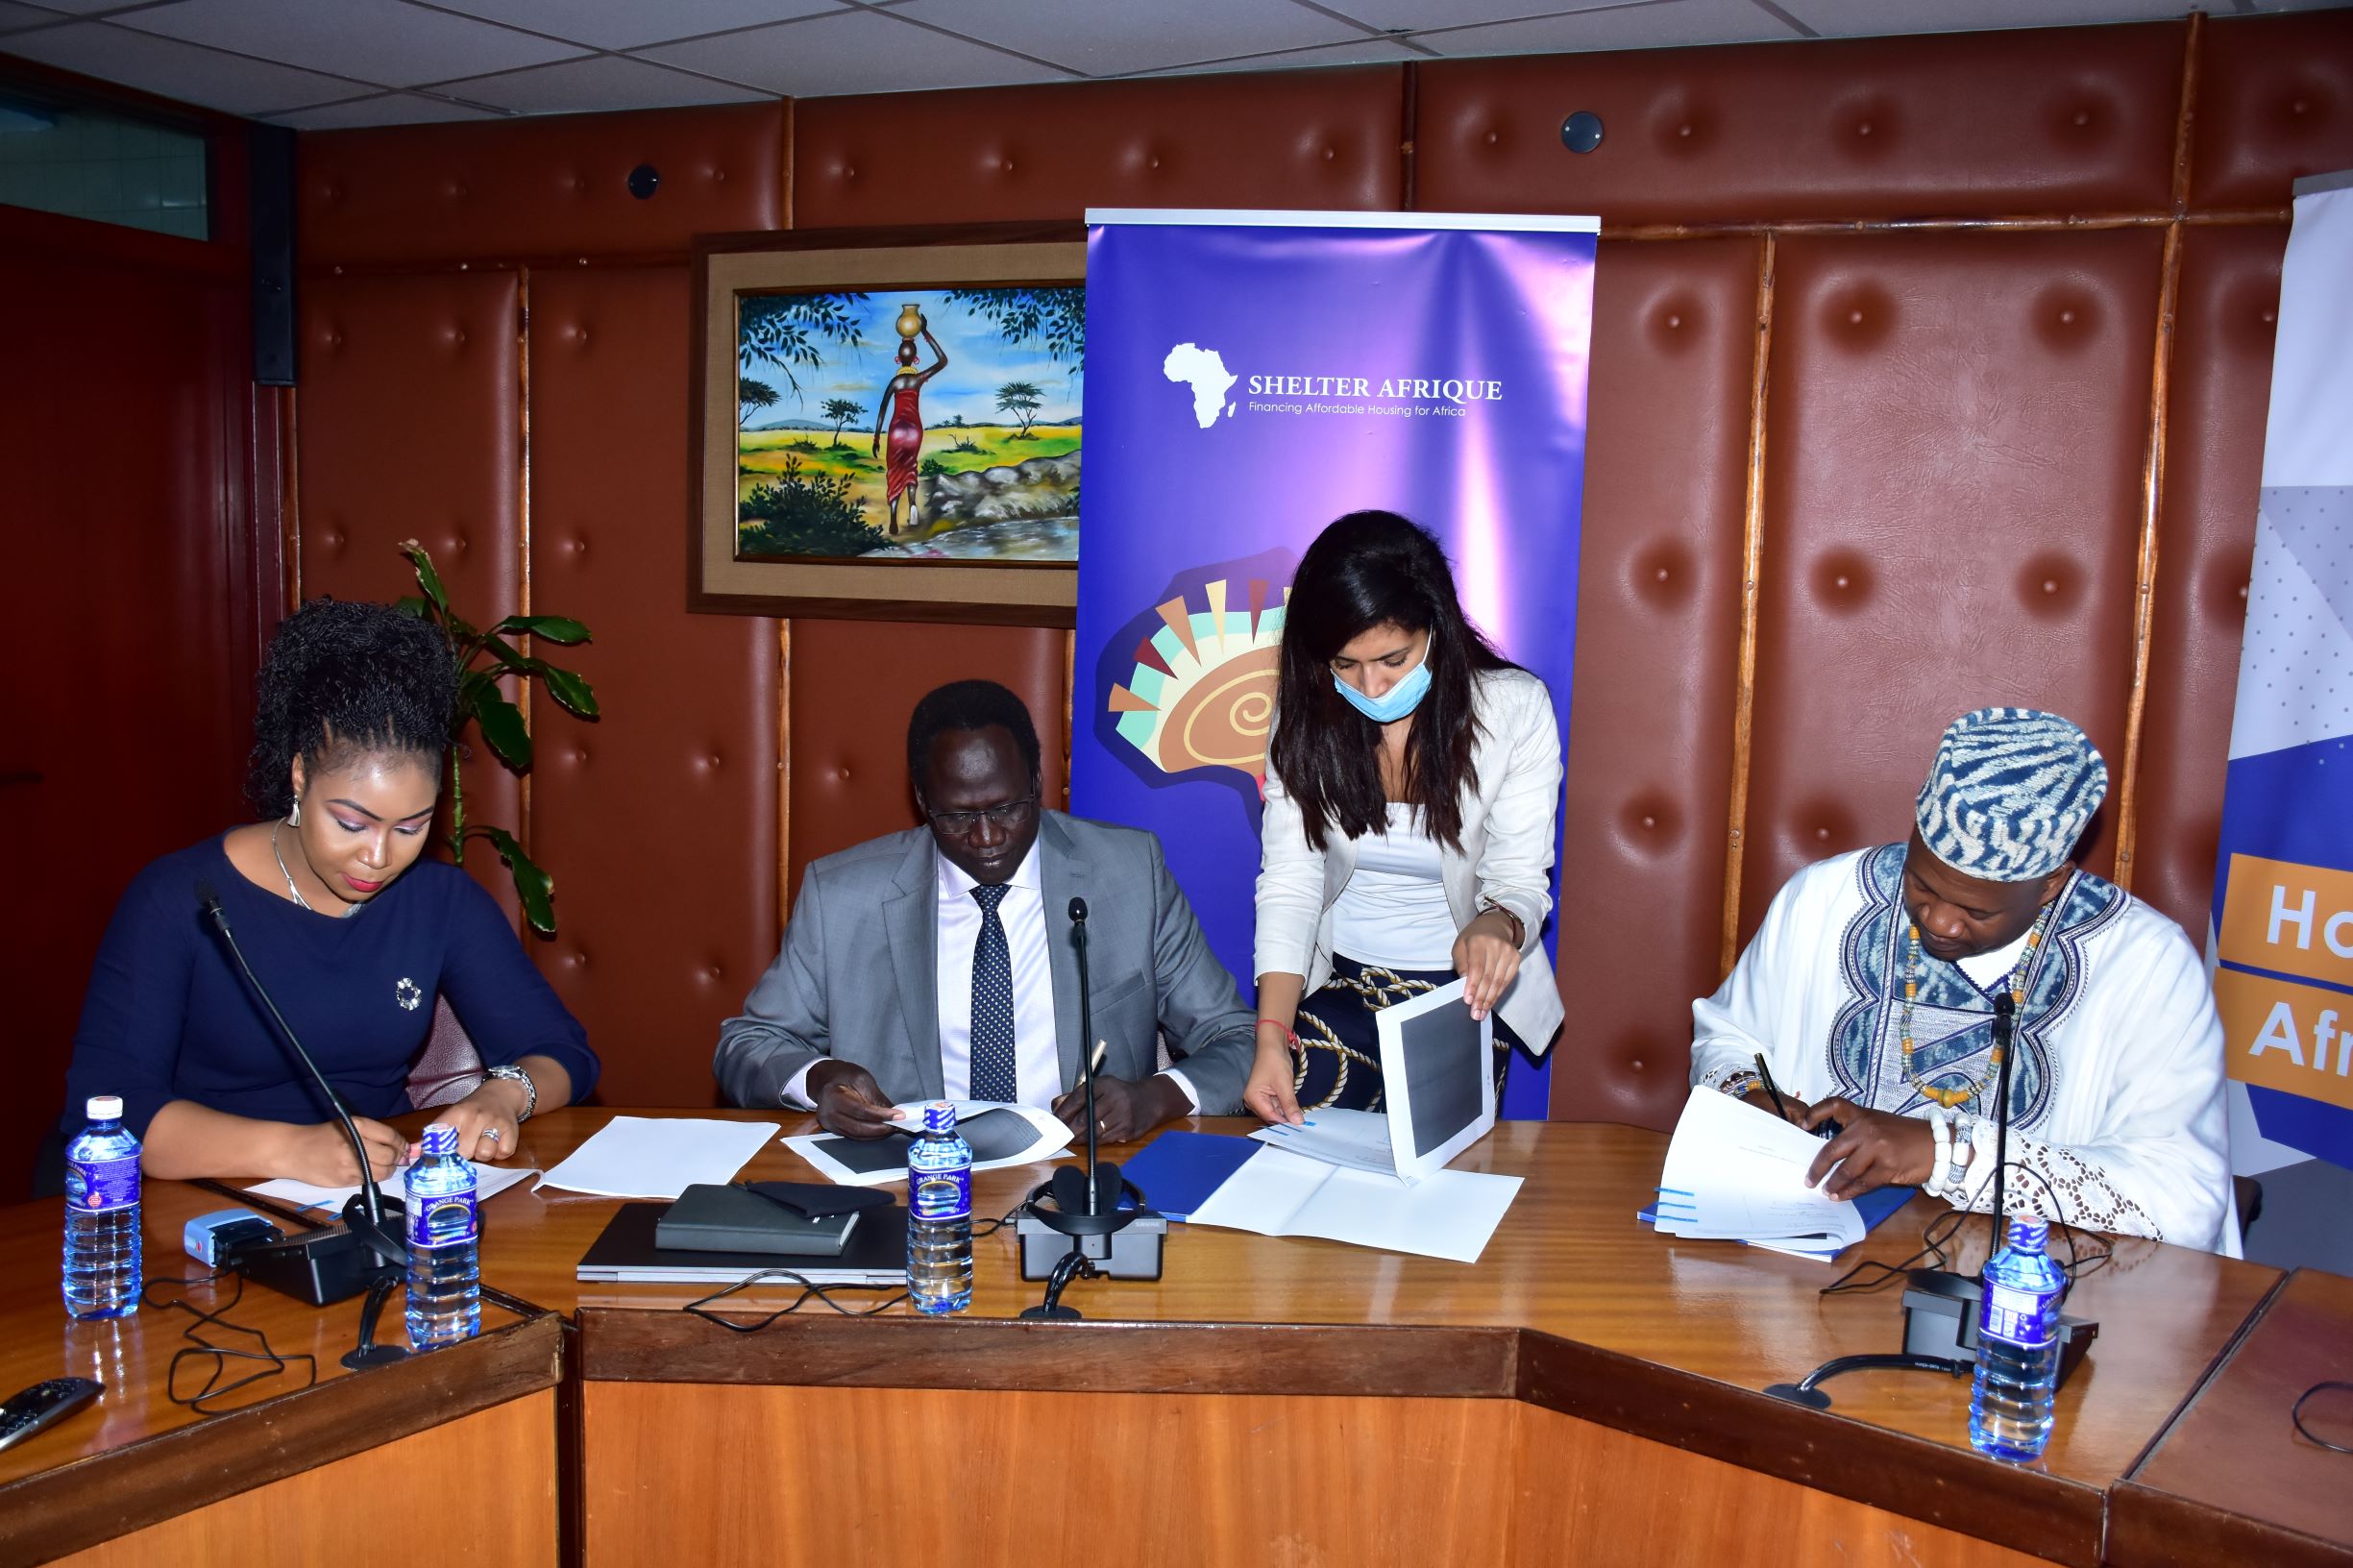 Triangle Real Estate Chief Executive Officer Amb. Arop Deng Kuol, and  Shelter Afrique Chief Executive Officer Andrew Chimphondah sign the USD1.5bn housing deal in Nairobi witnessed by Benchmark Solutions Managing Director Laura Akunga  and Shelter afrique's head of legal Houda Boudlali